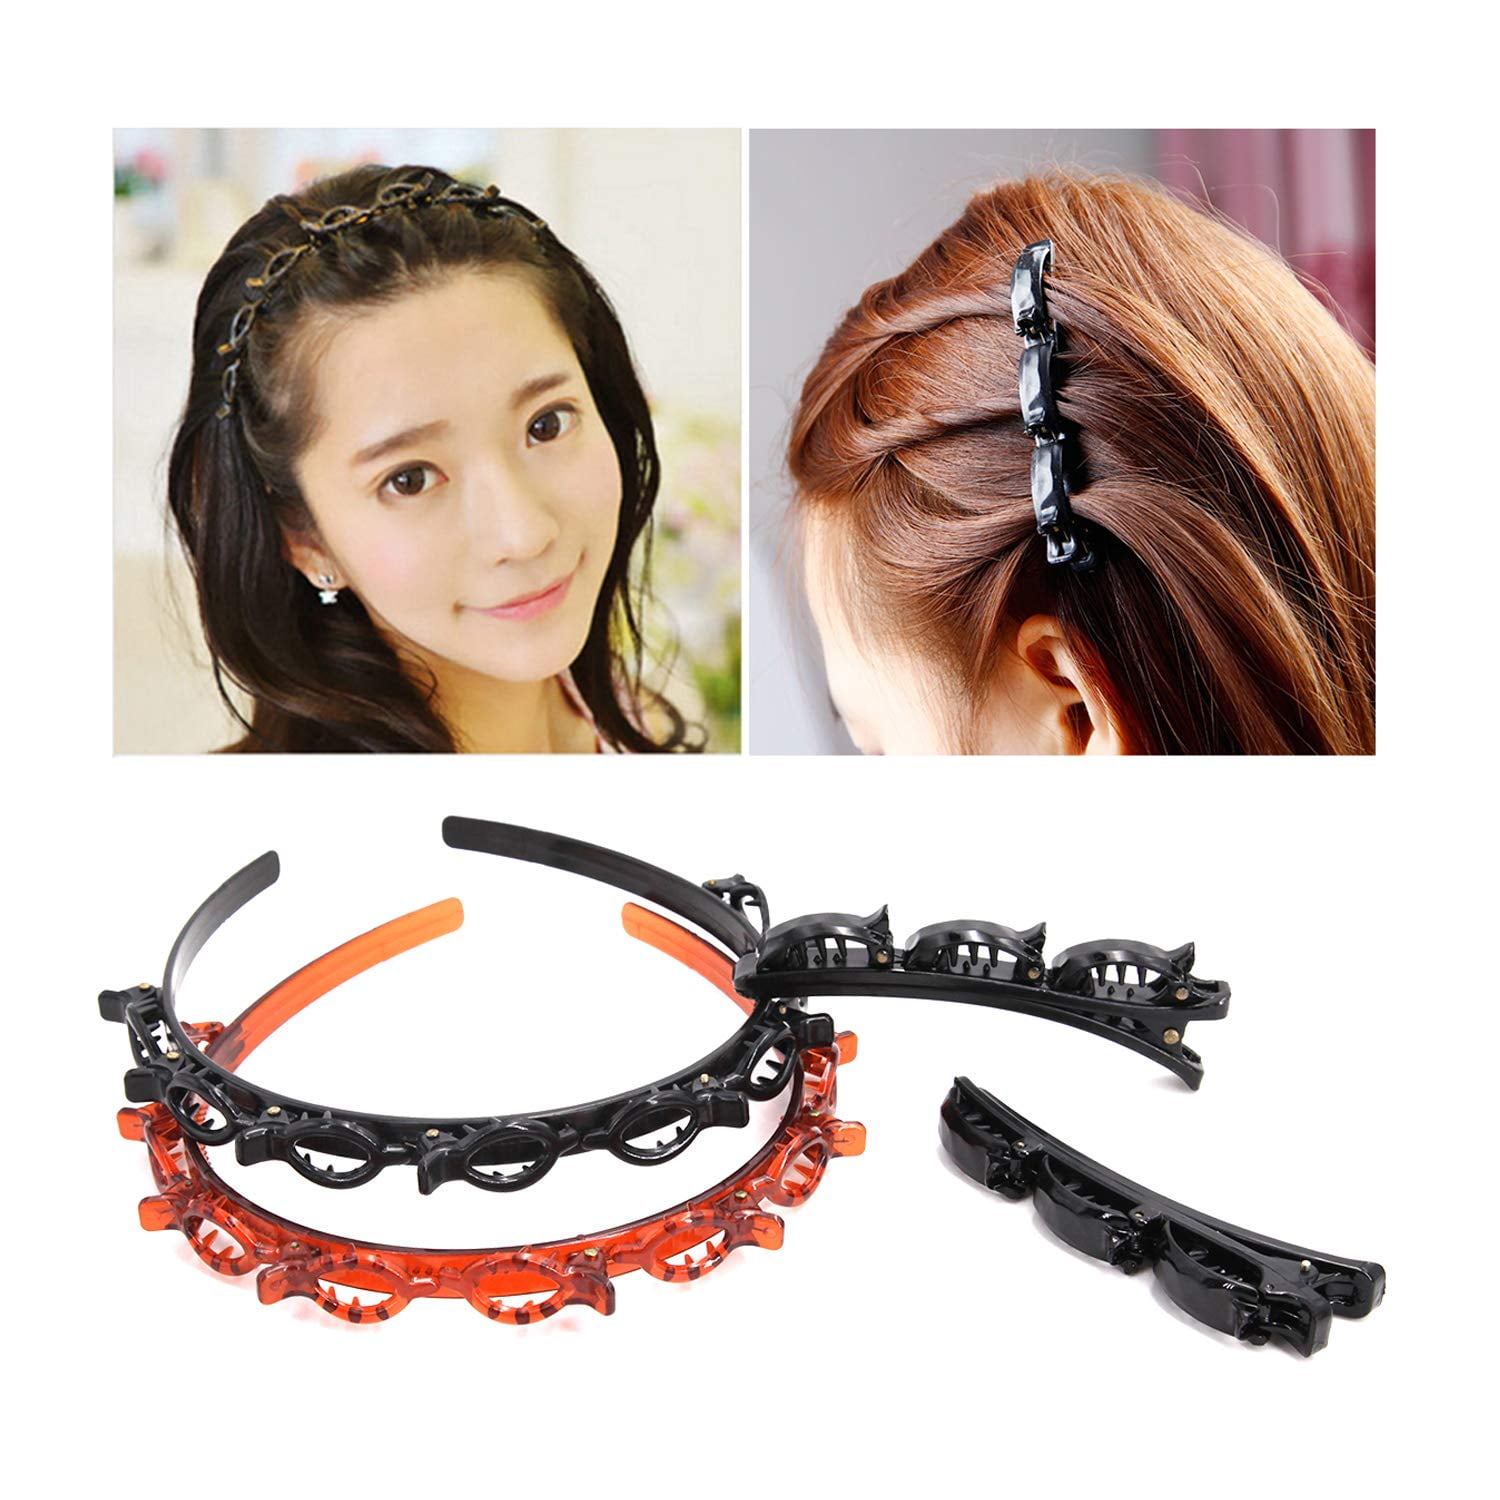 Fashion Double Layer Band Twist Plait Headband Hairpin Hair Claw Clips,  Black Magic Double Bangs Hairstyle Hairpin Hair Twister Headband Hair  Tools, Hair Accessories for Women, Girls 